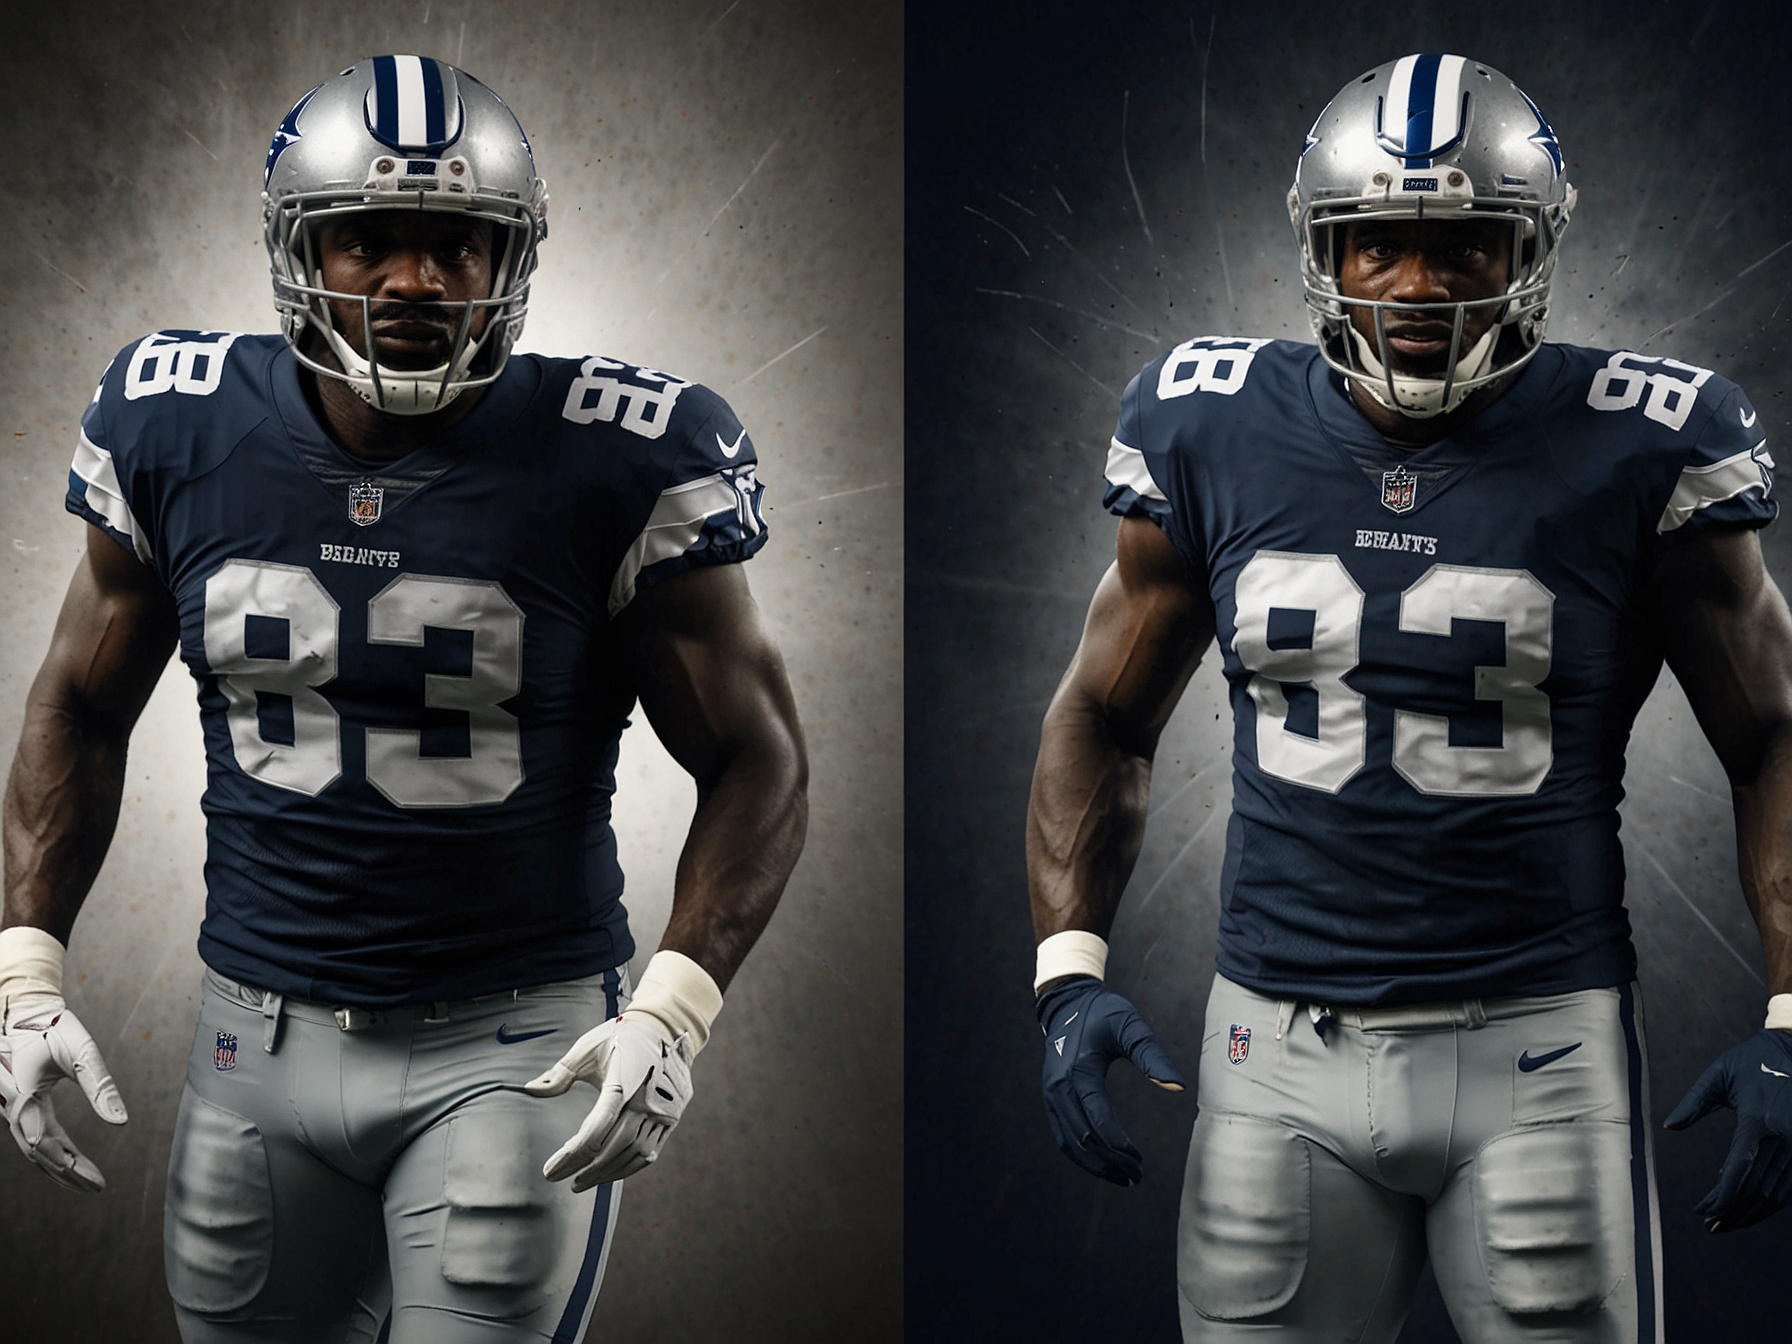 A split-screen image showing Dez Bryant passionately speaking on social media, with a backdrop showcasing his NFL career highlights and recent social media posts.